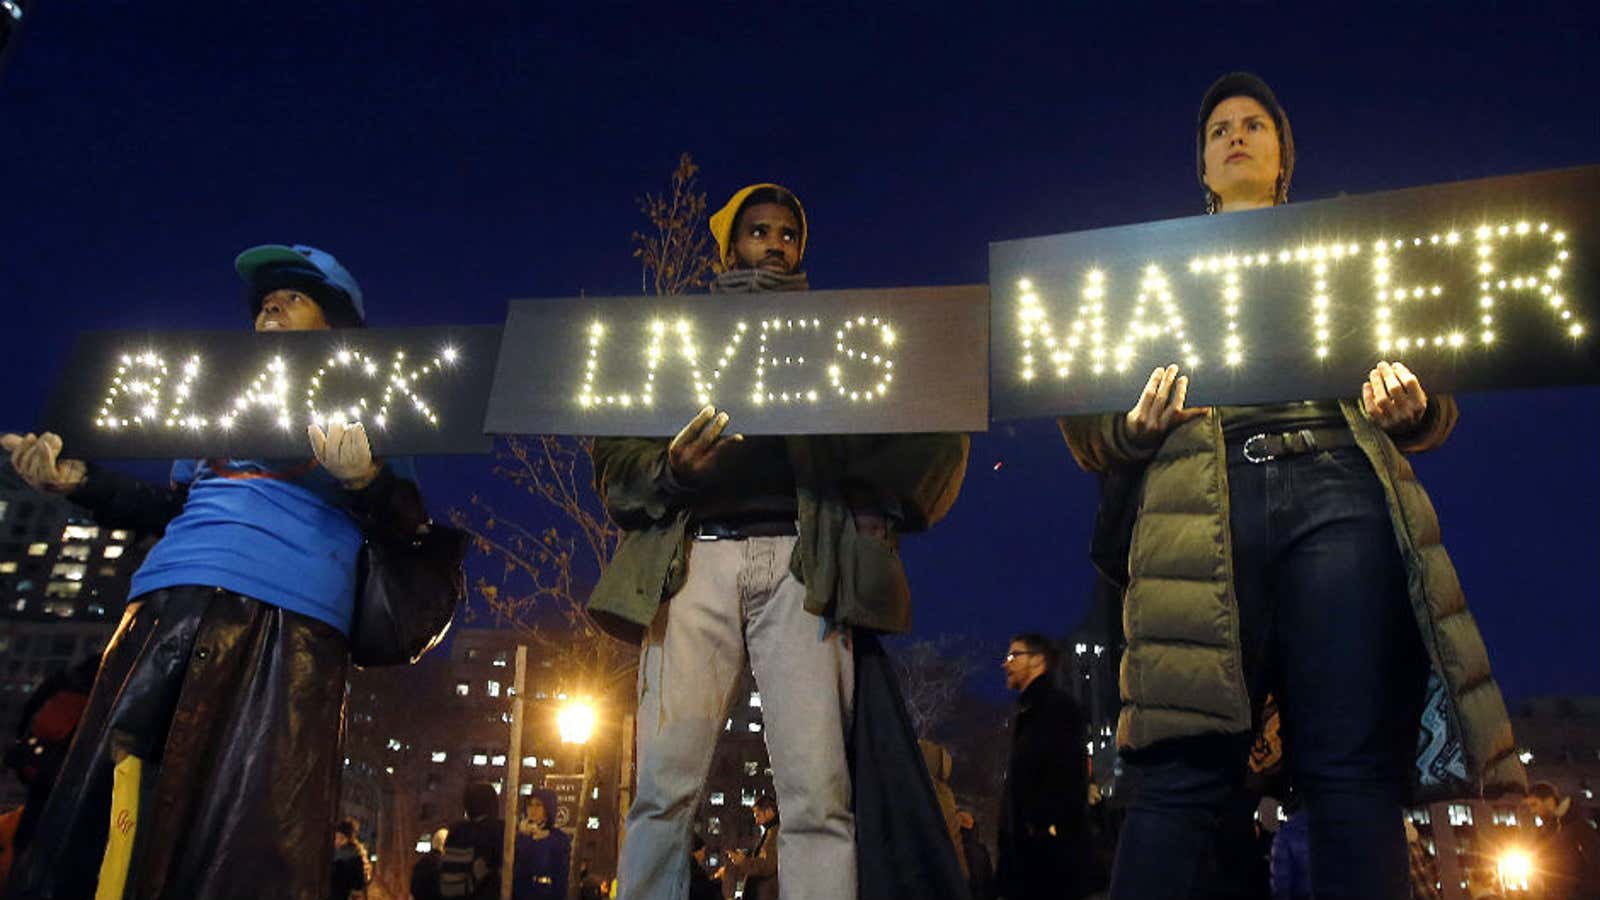 A lit-up sign was the centerpiece of the protest at Foley Square.